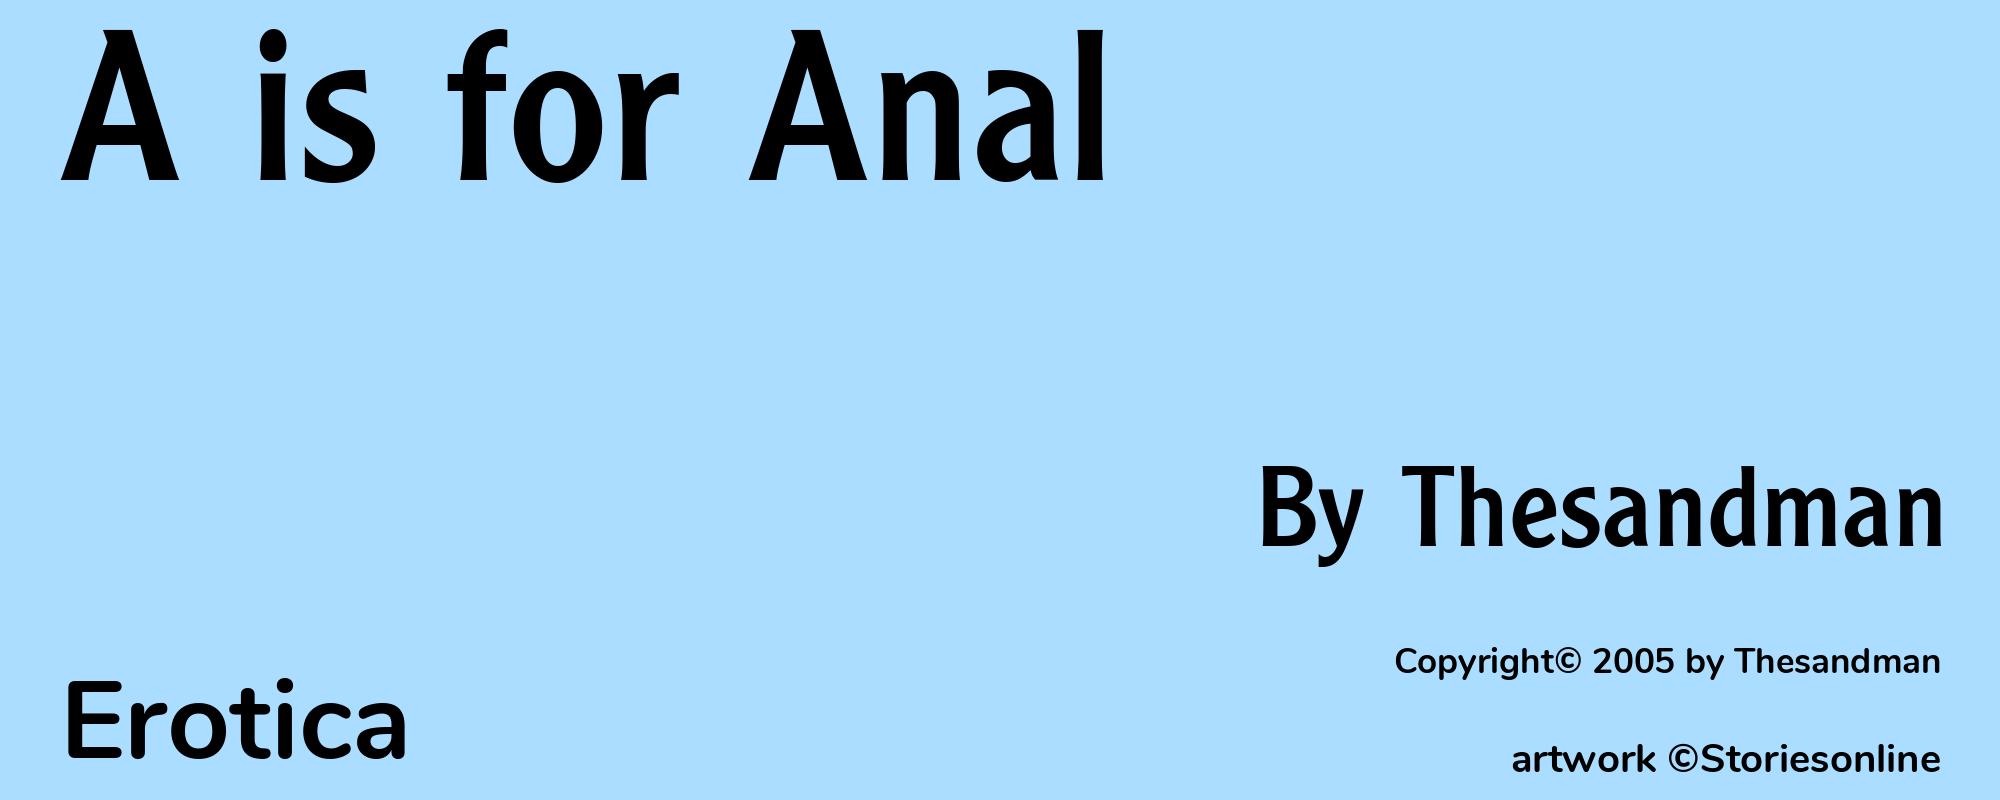 A is for Anal - Cover